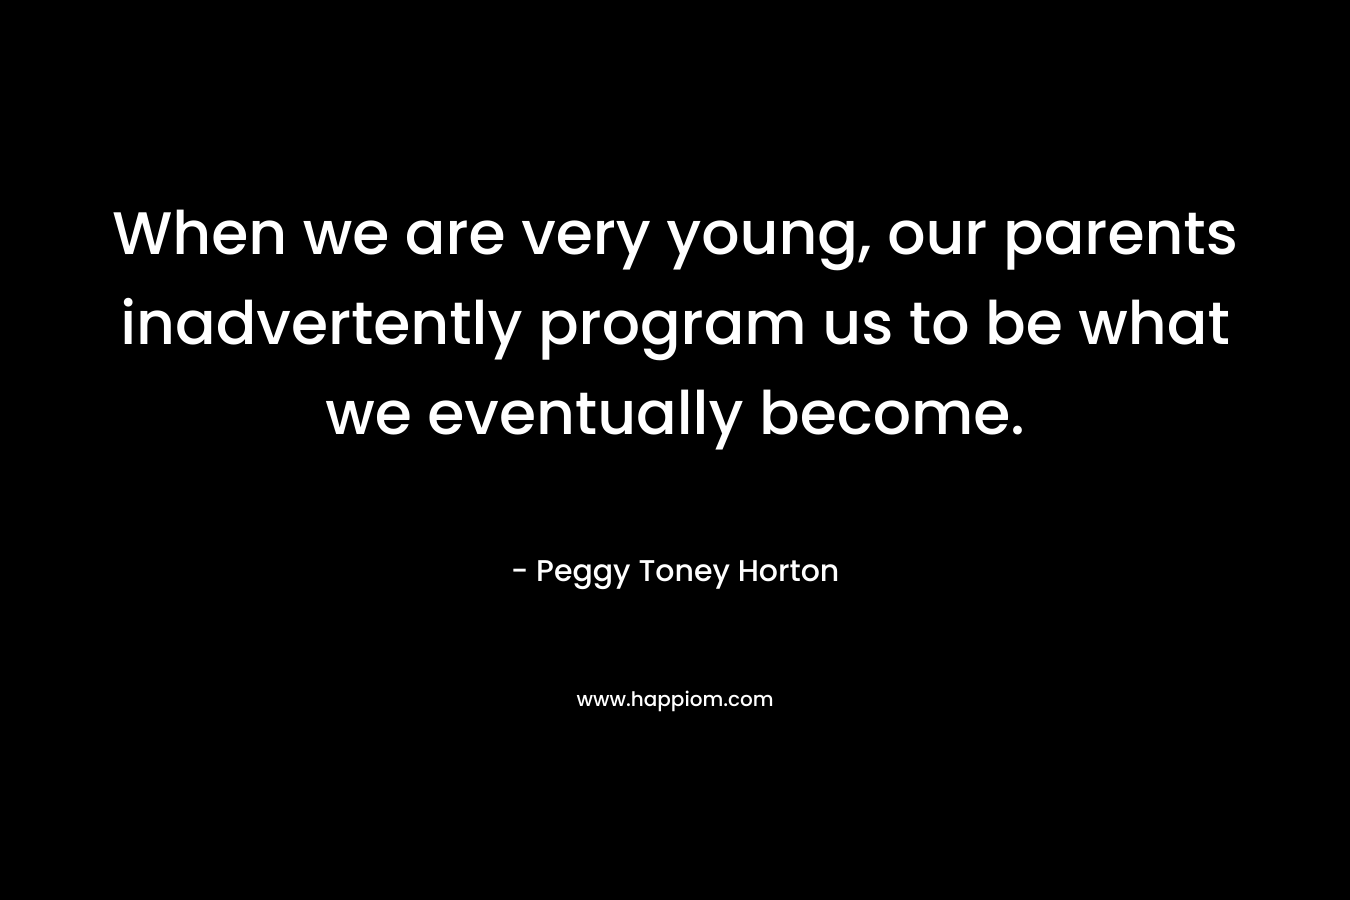 When we are very young, our parents inadvertently program us to be what we eventually become.